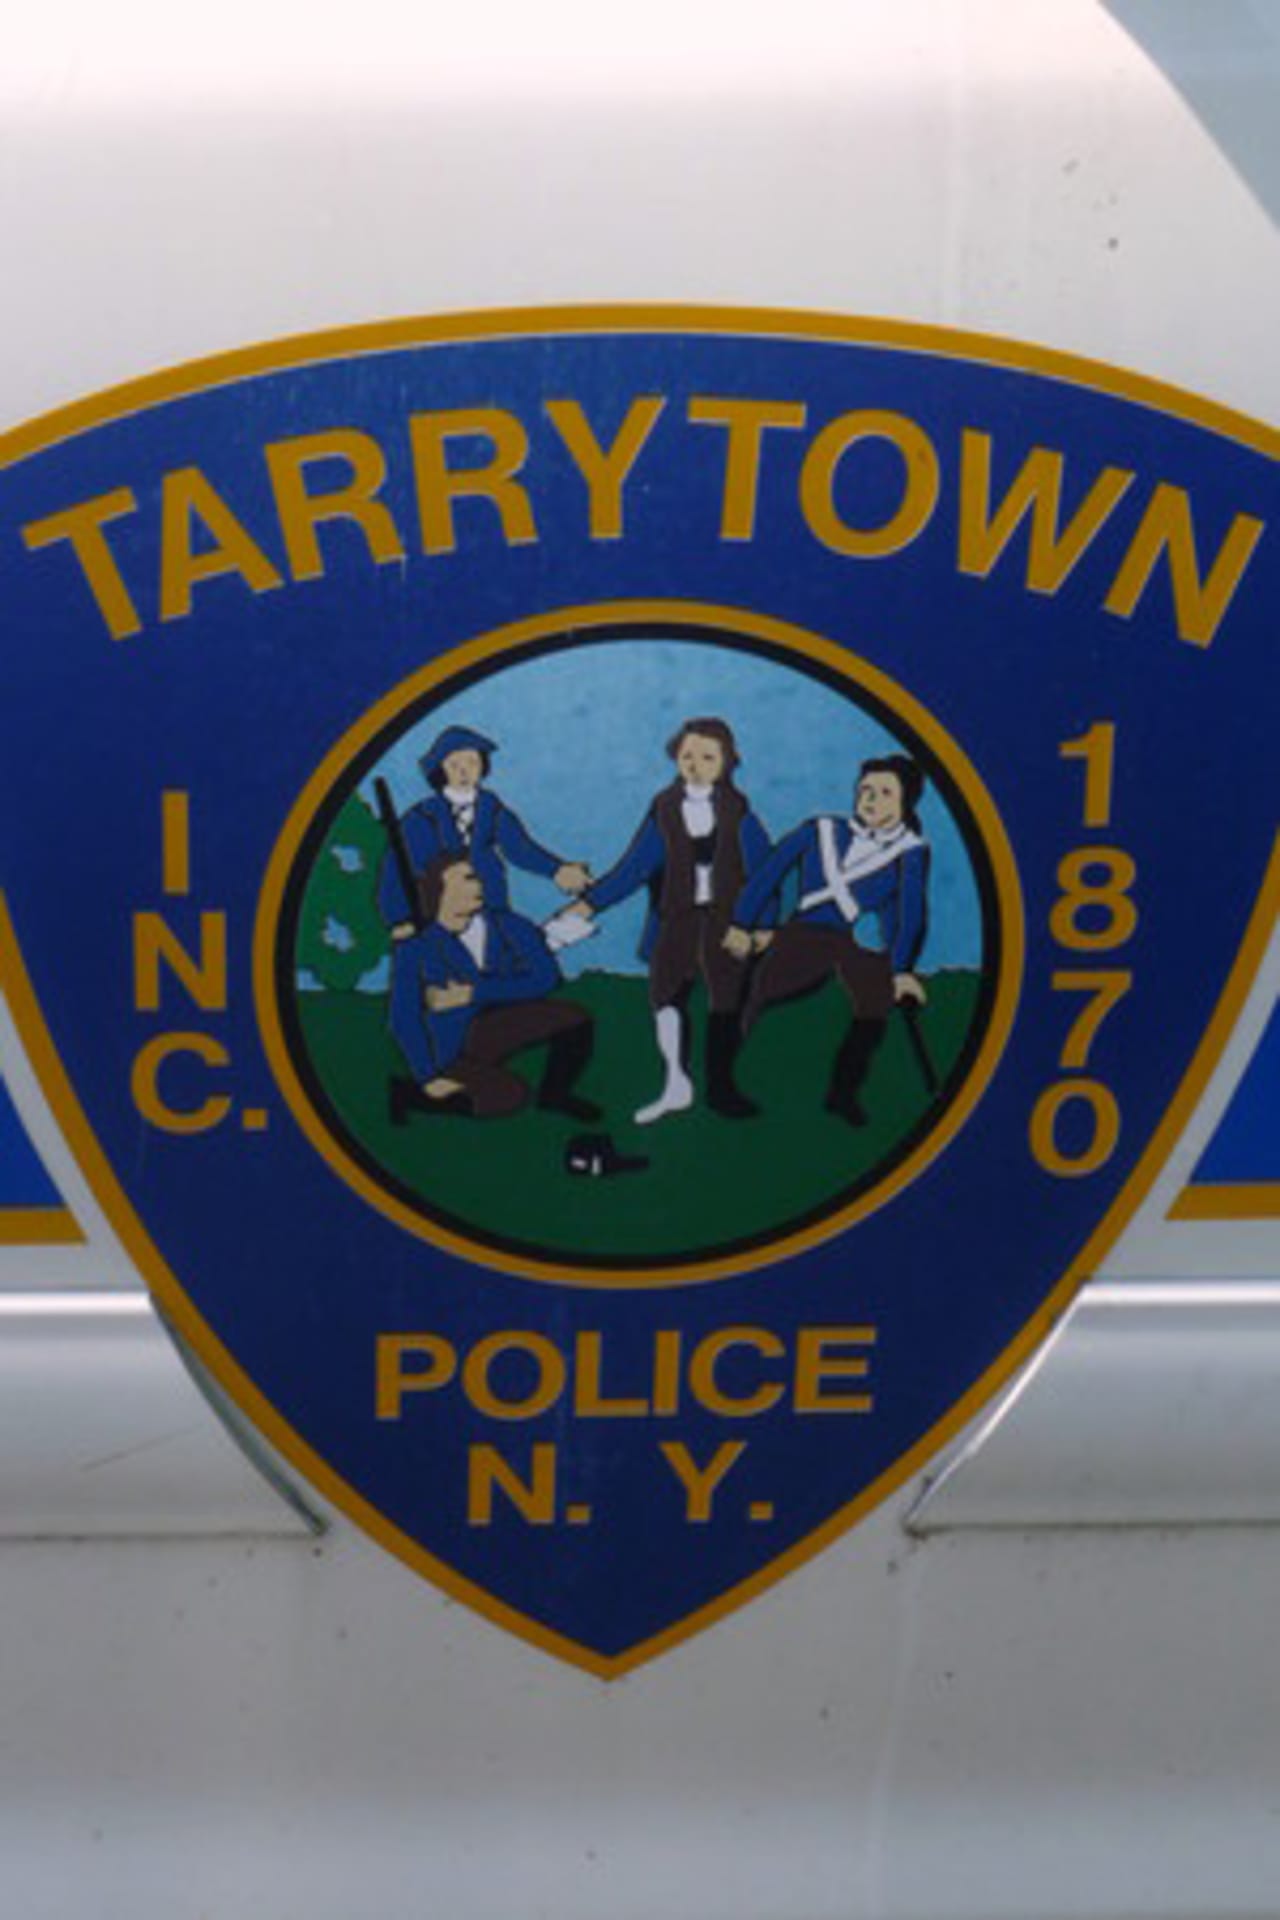 A suspicious, unattended duffel bag prompted a brief evacuation of the Tarrytown Train Station, but police say an investigation revealed it was only clothes.